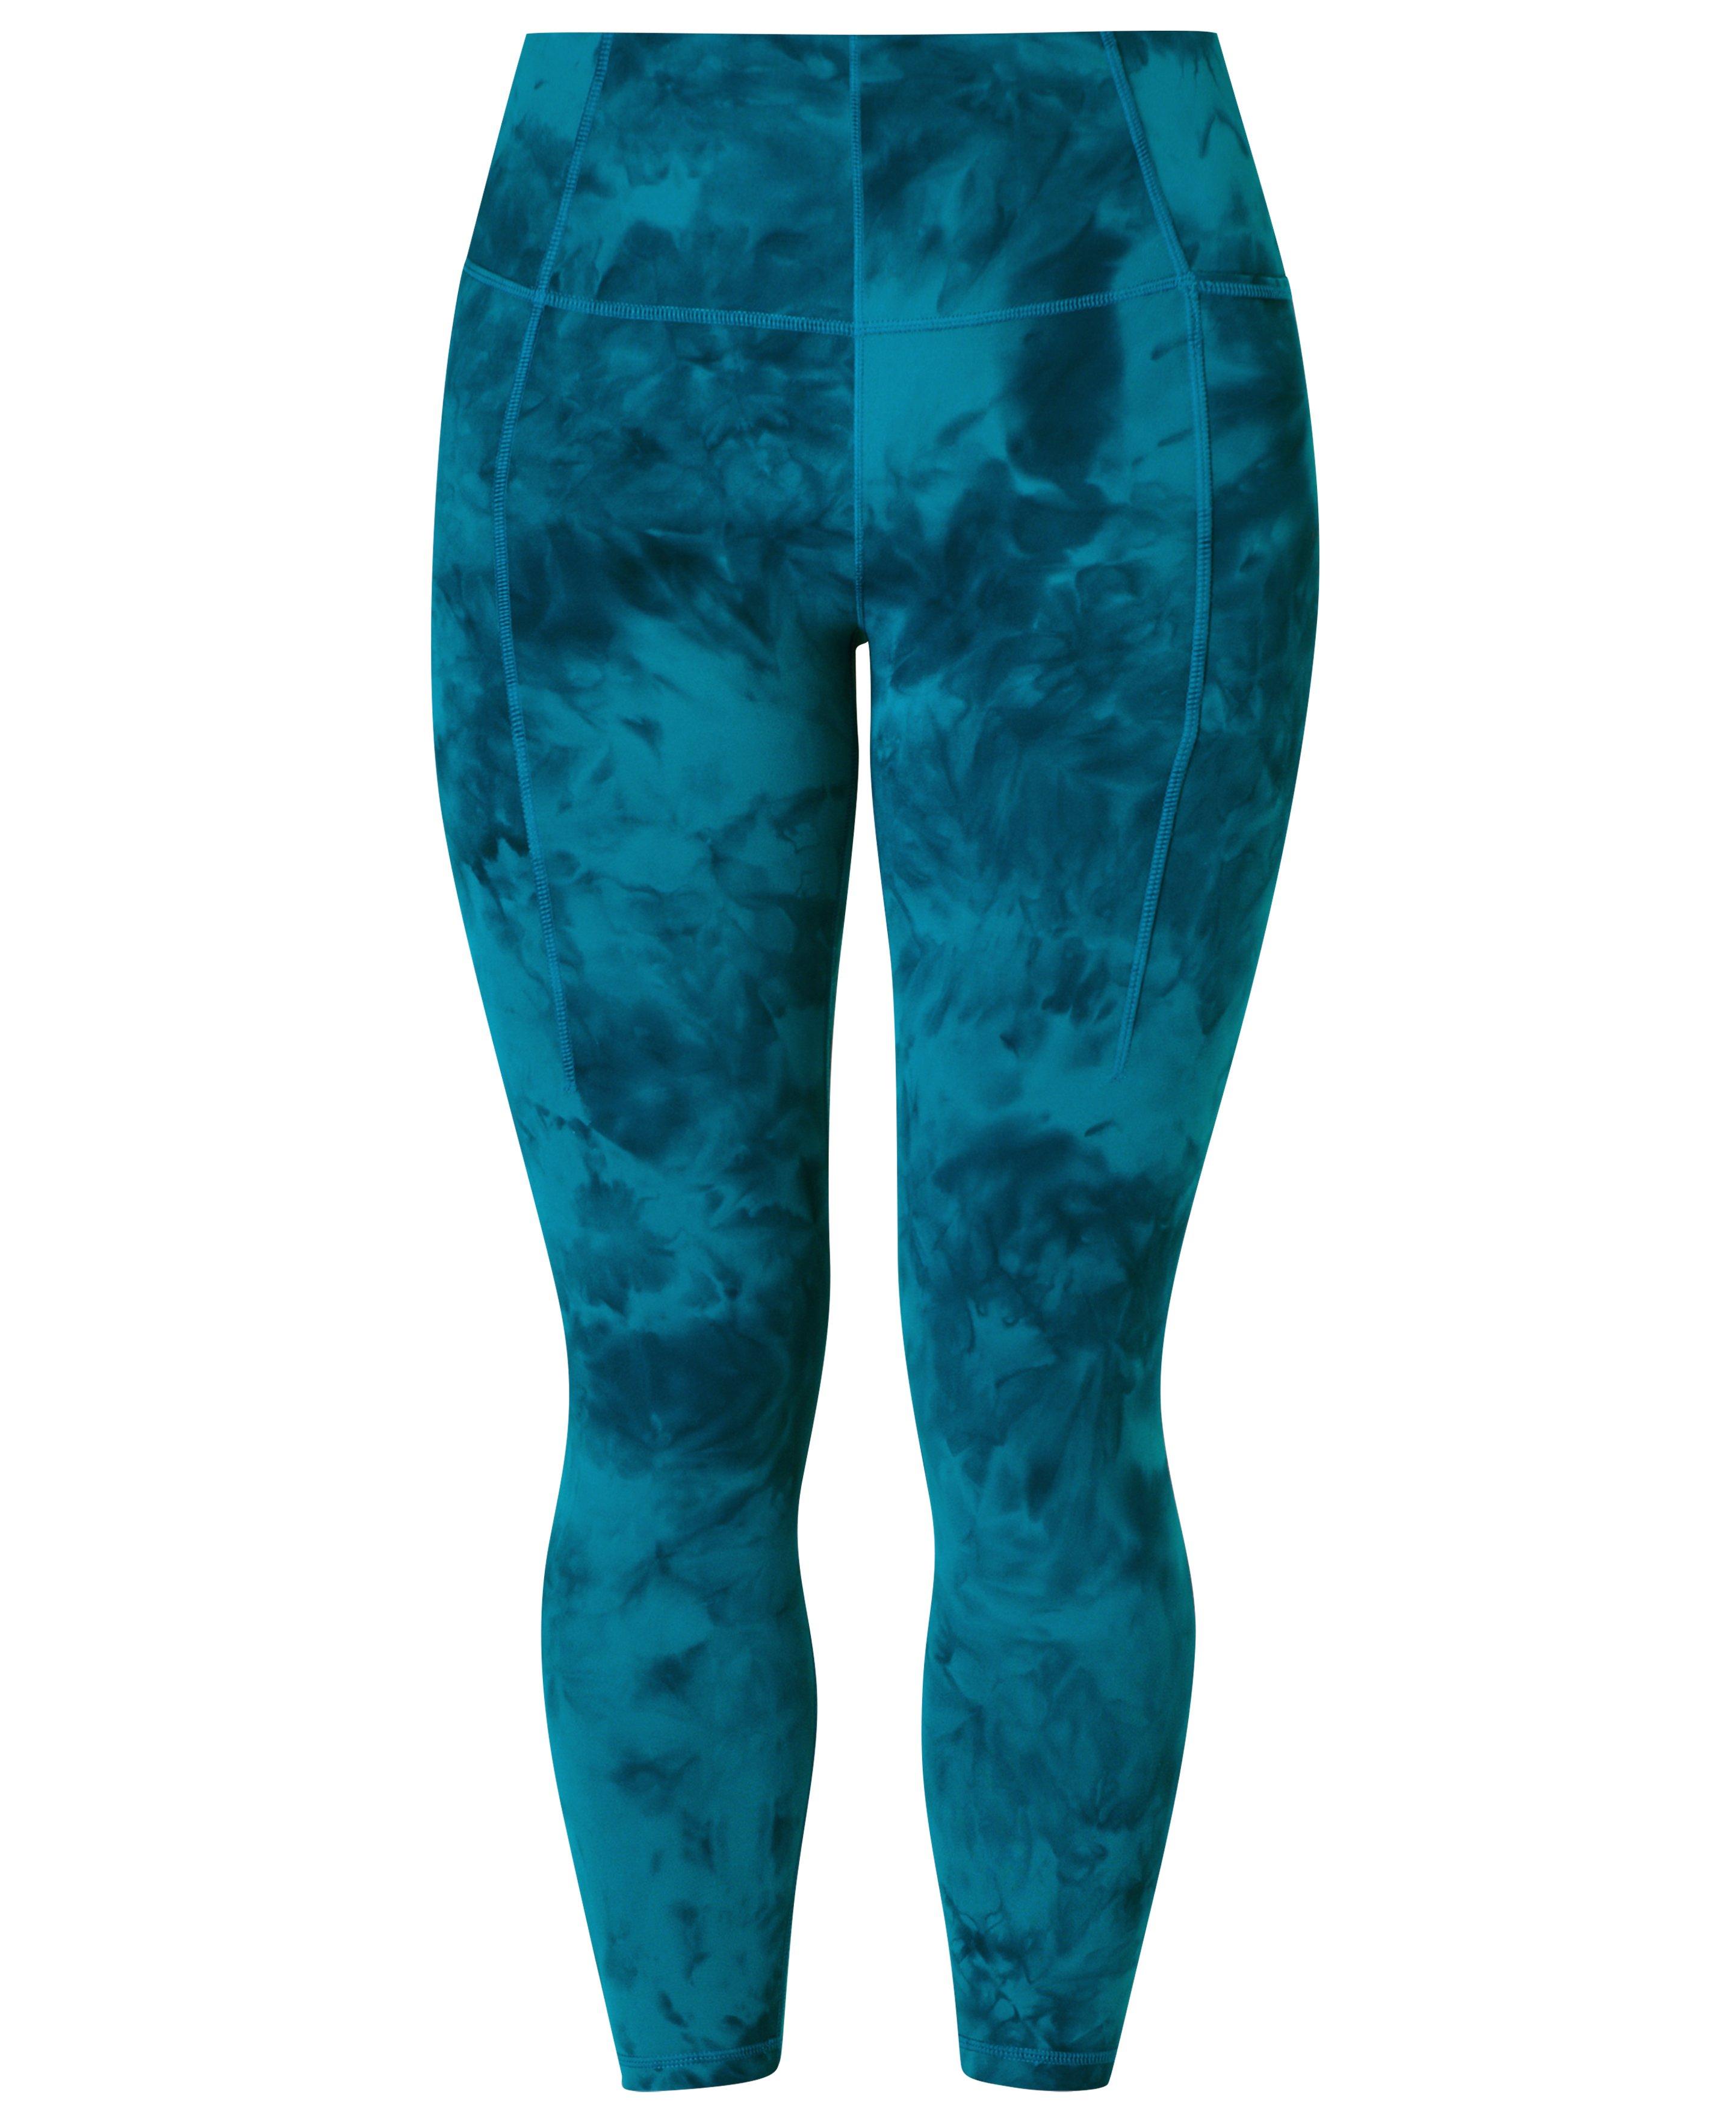 Buy Women's turquoise blue sports tight with reinforced side seams